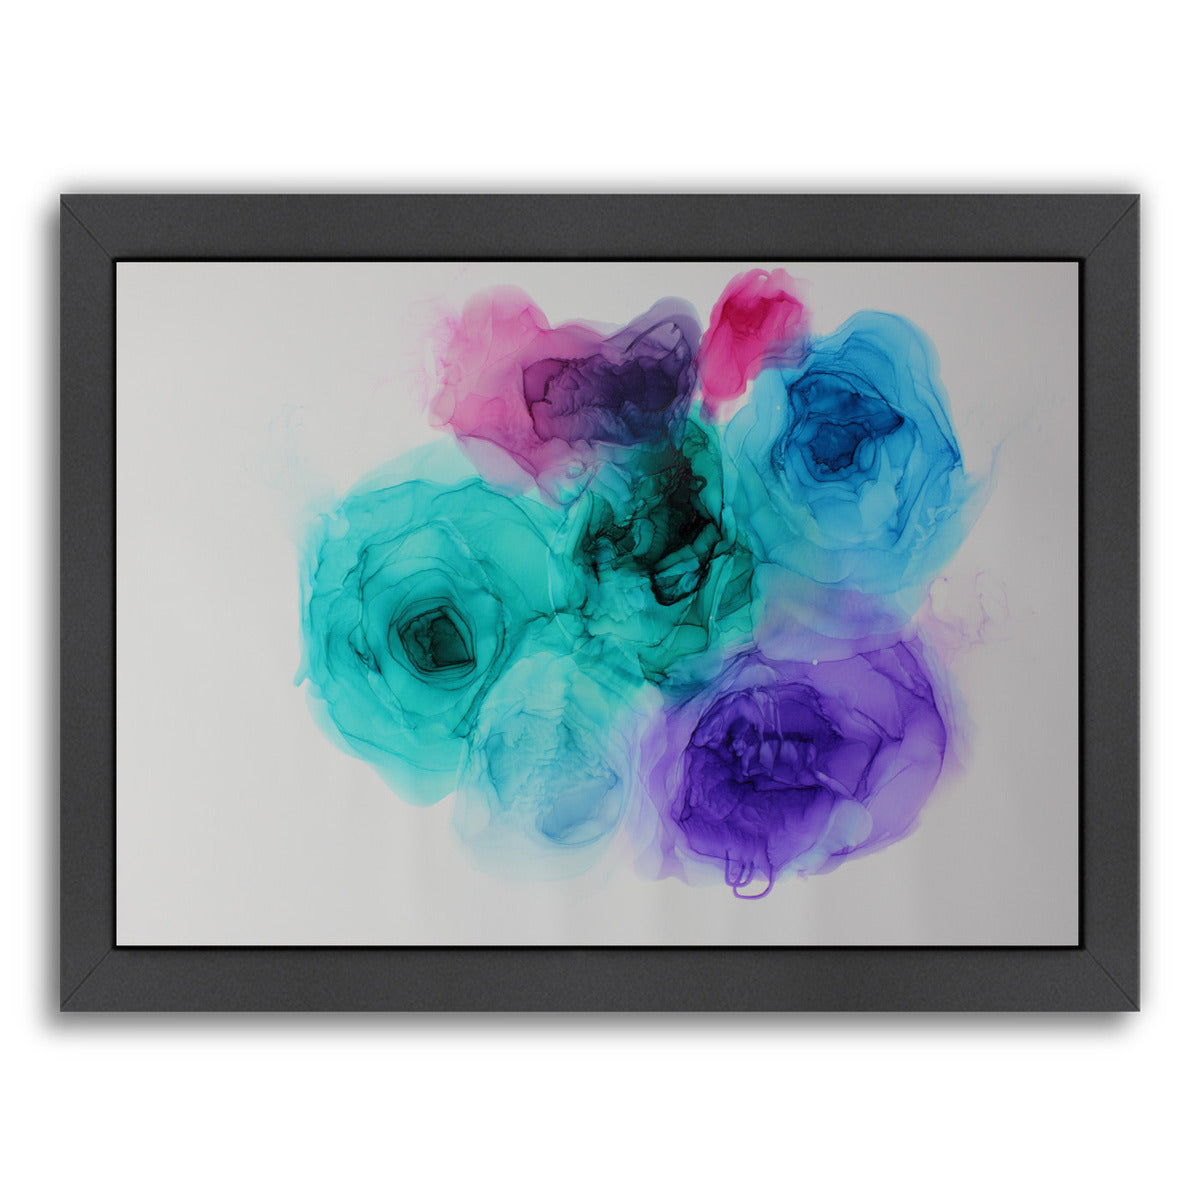 Lullaby by Emma Thomas Framed Print - Americanflat